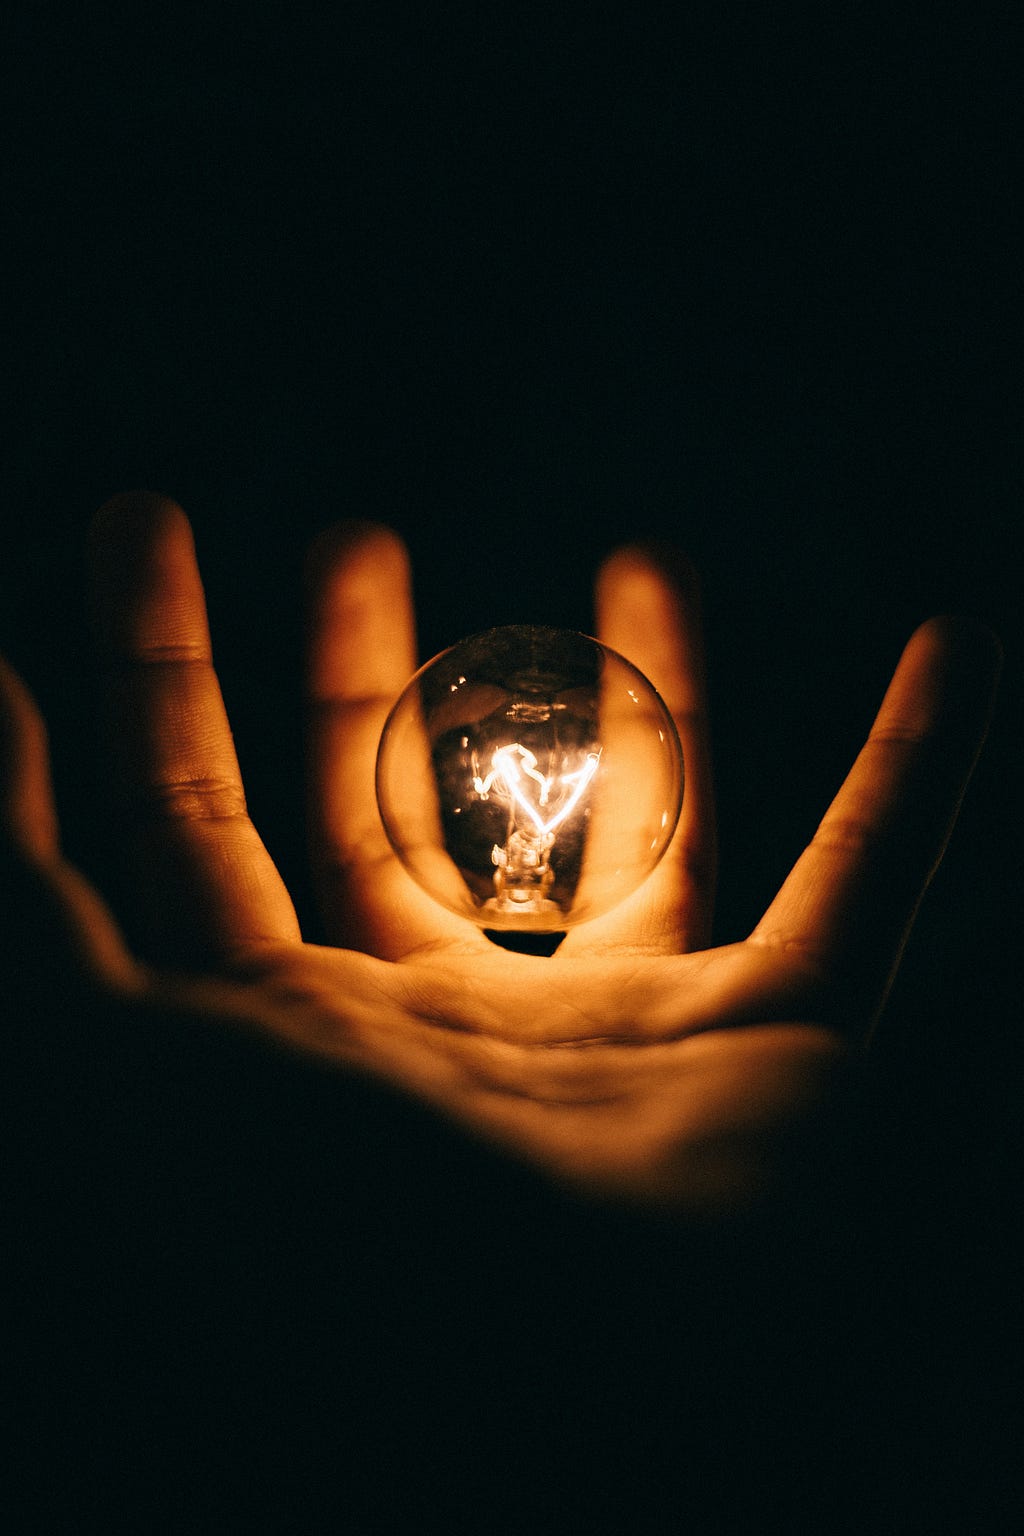 hand in the dark holding a bulb with a spark